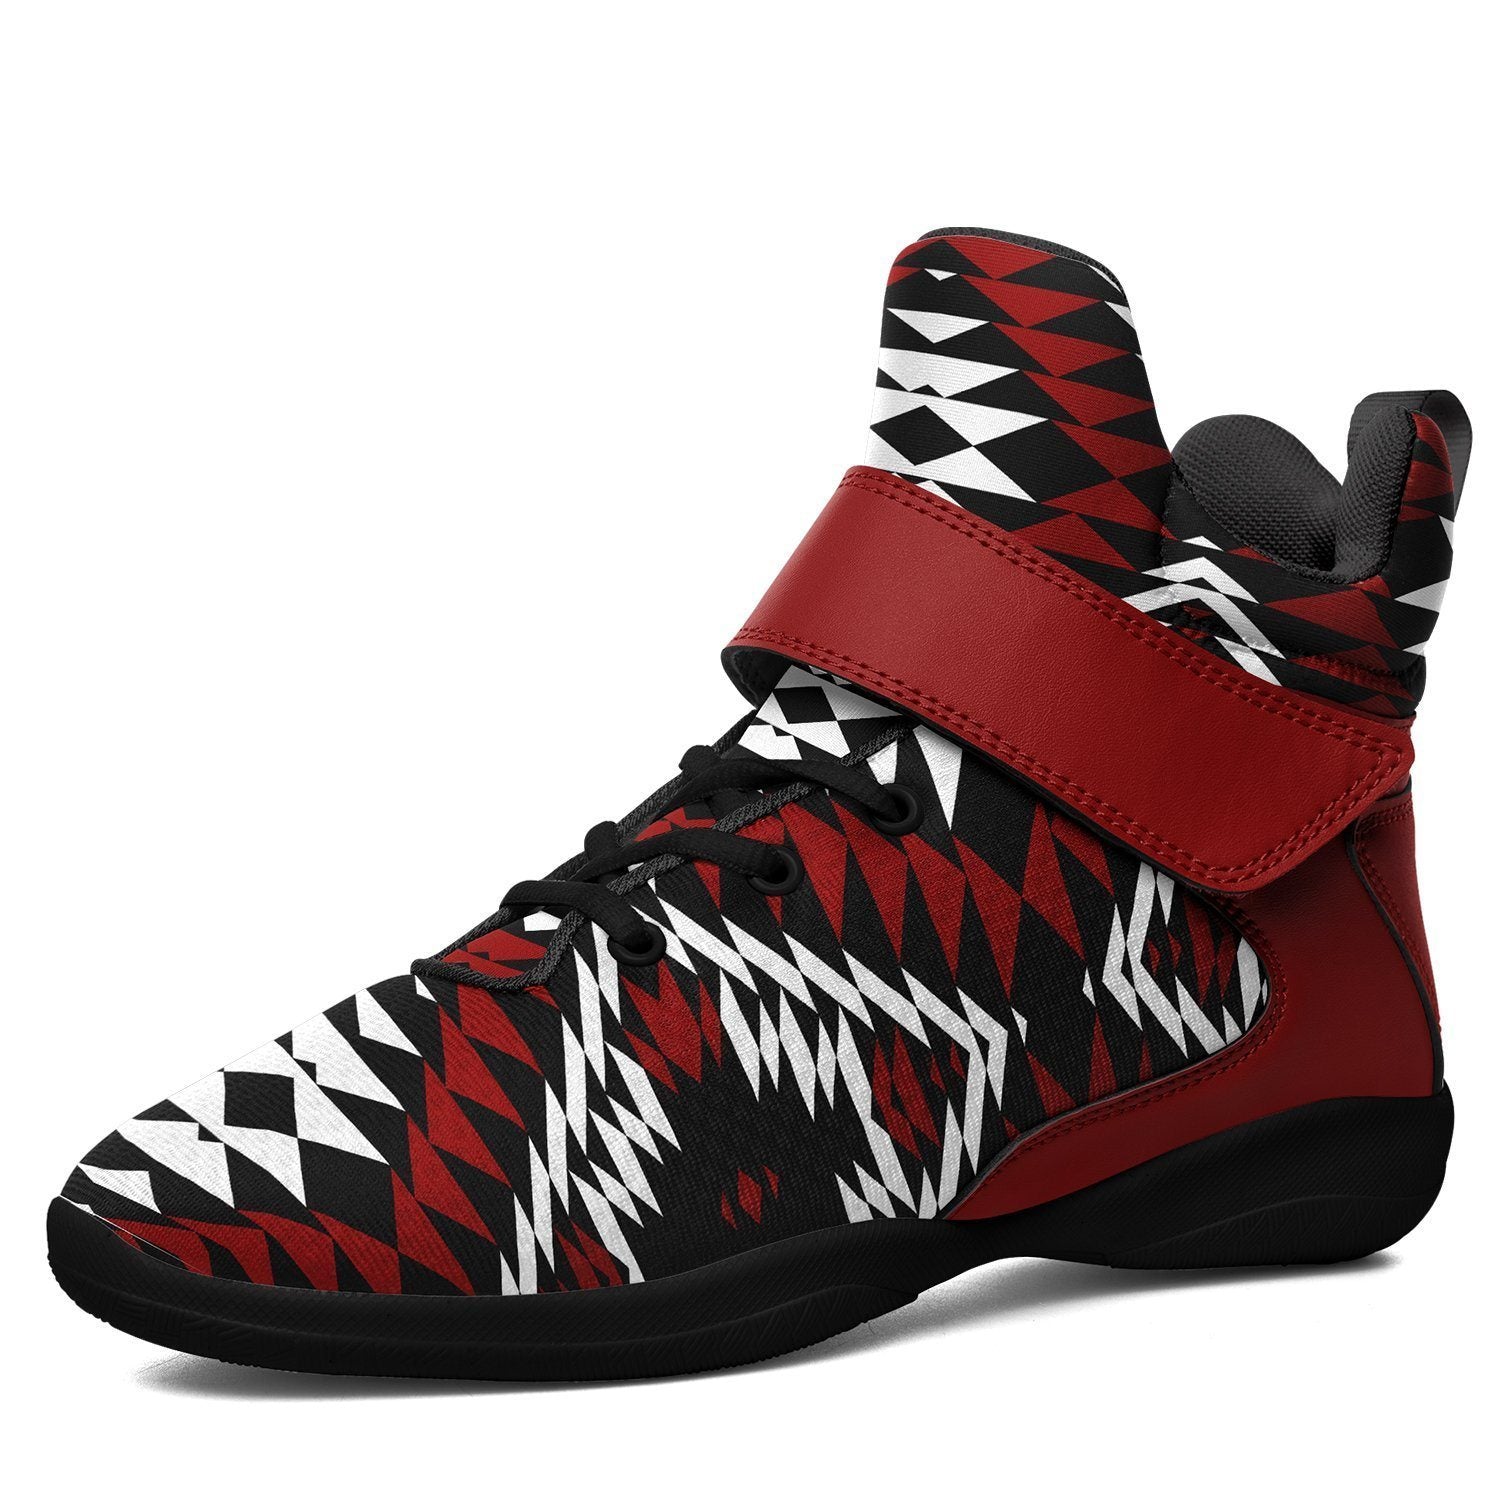 Taos Wool Ipottaa Basketball / Sport High Top Shoes - Black Sole 49 Dzine US Men 7 / EUR 40 Black Sole with Dark Red Strap 